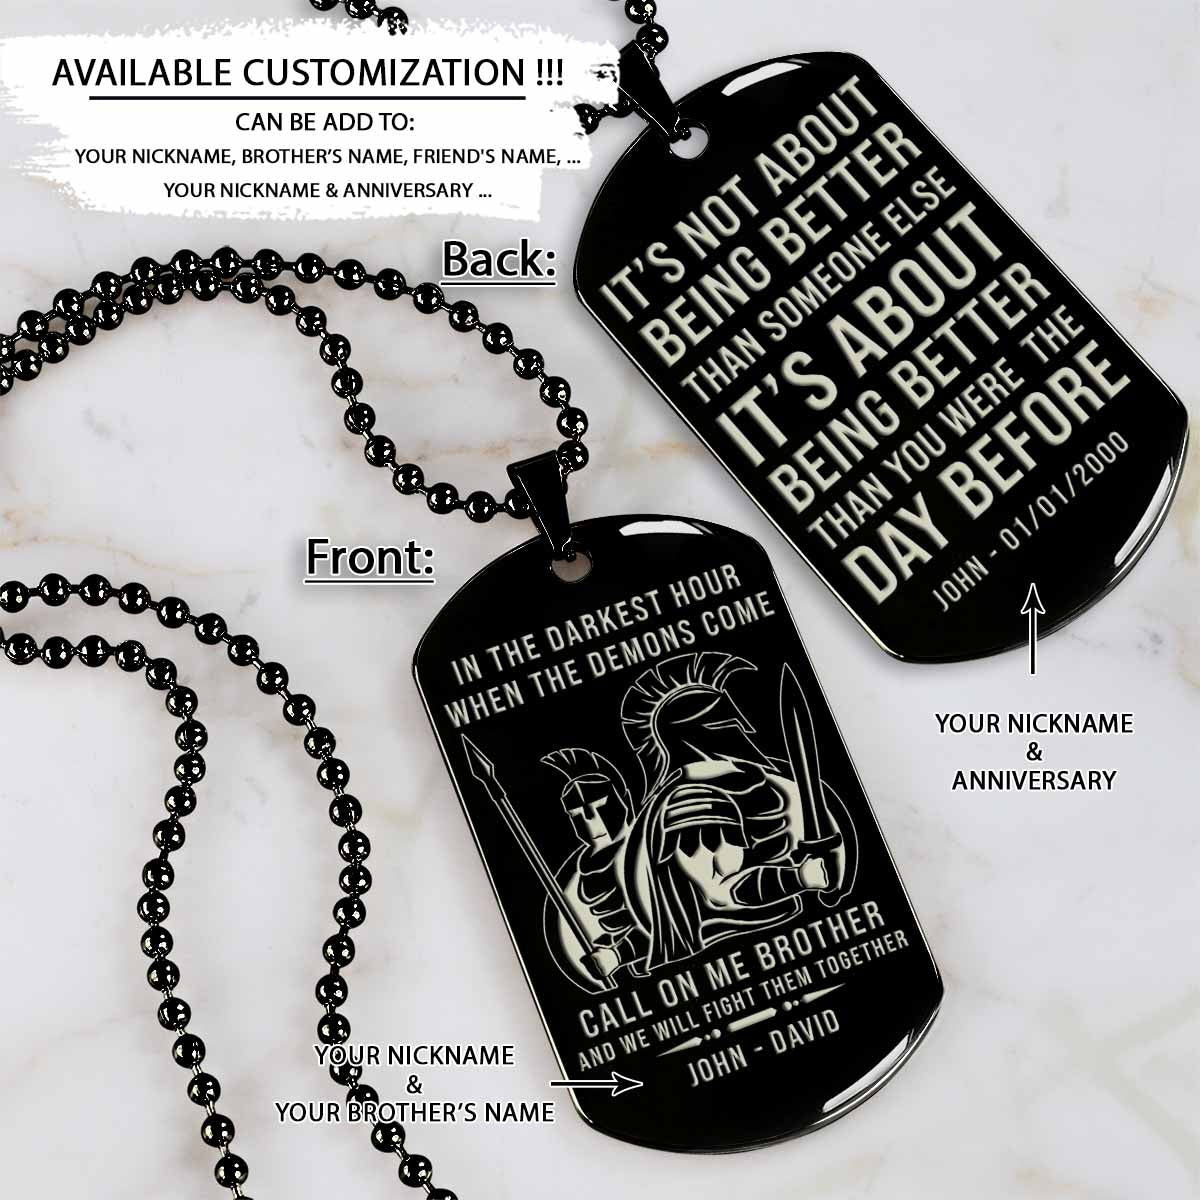 WAD065 - Call On Me Brother - It's Not About Being Better Than Someone Else - Warrior - Spartan Necklace - Engrave Black Dog Tag